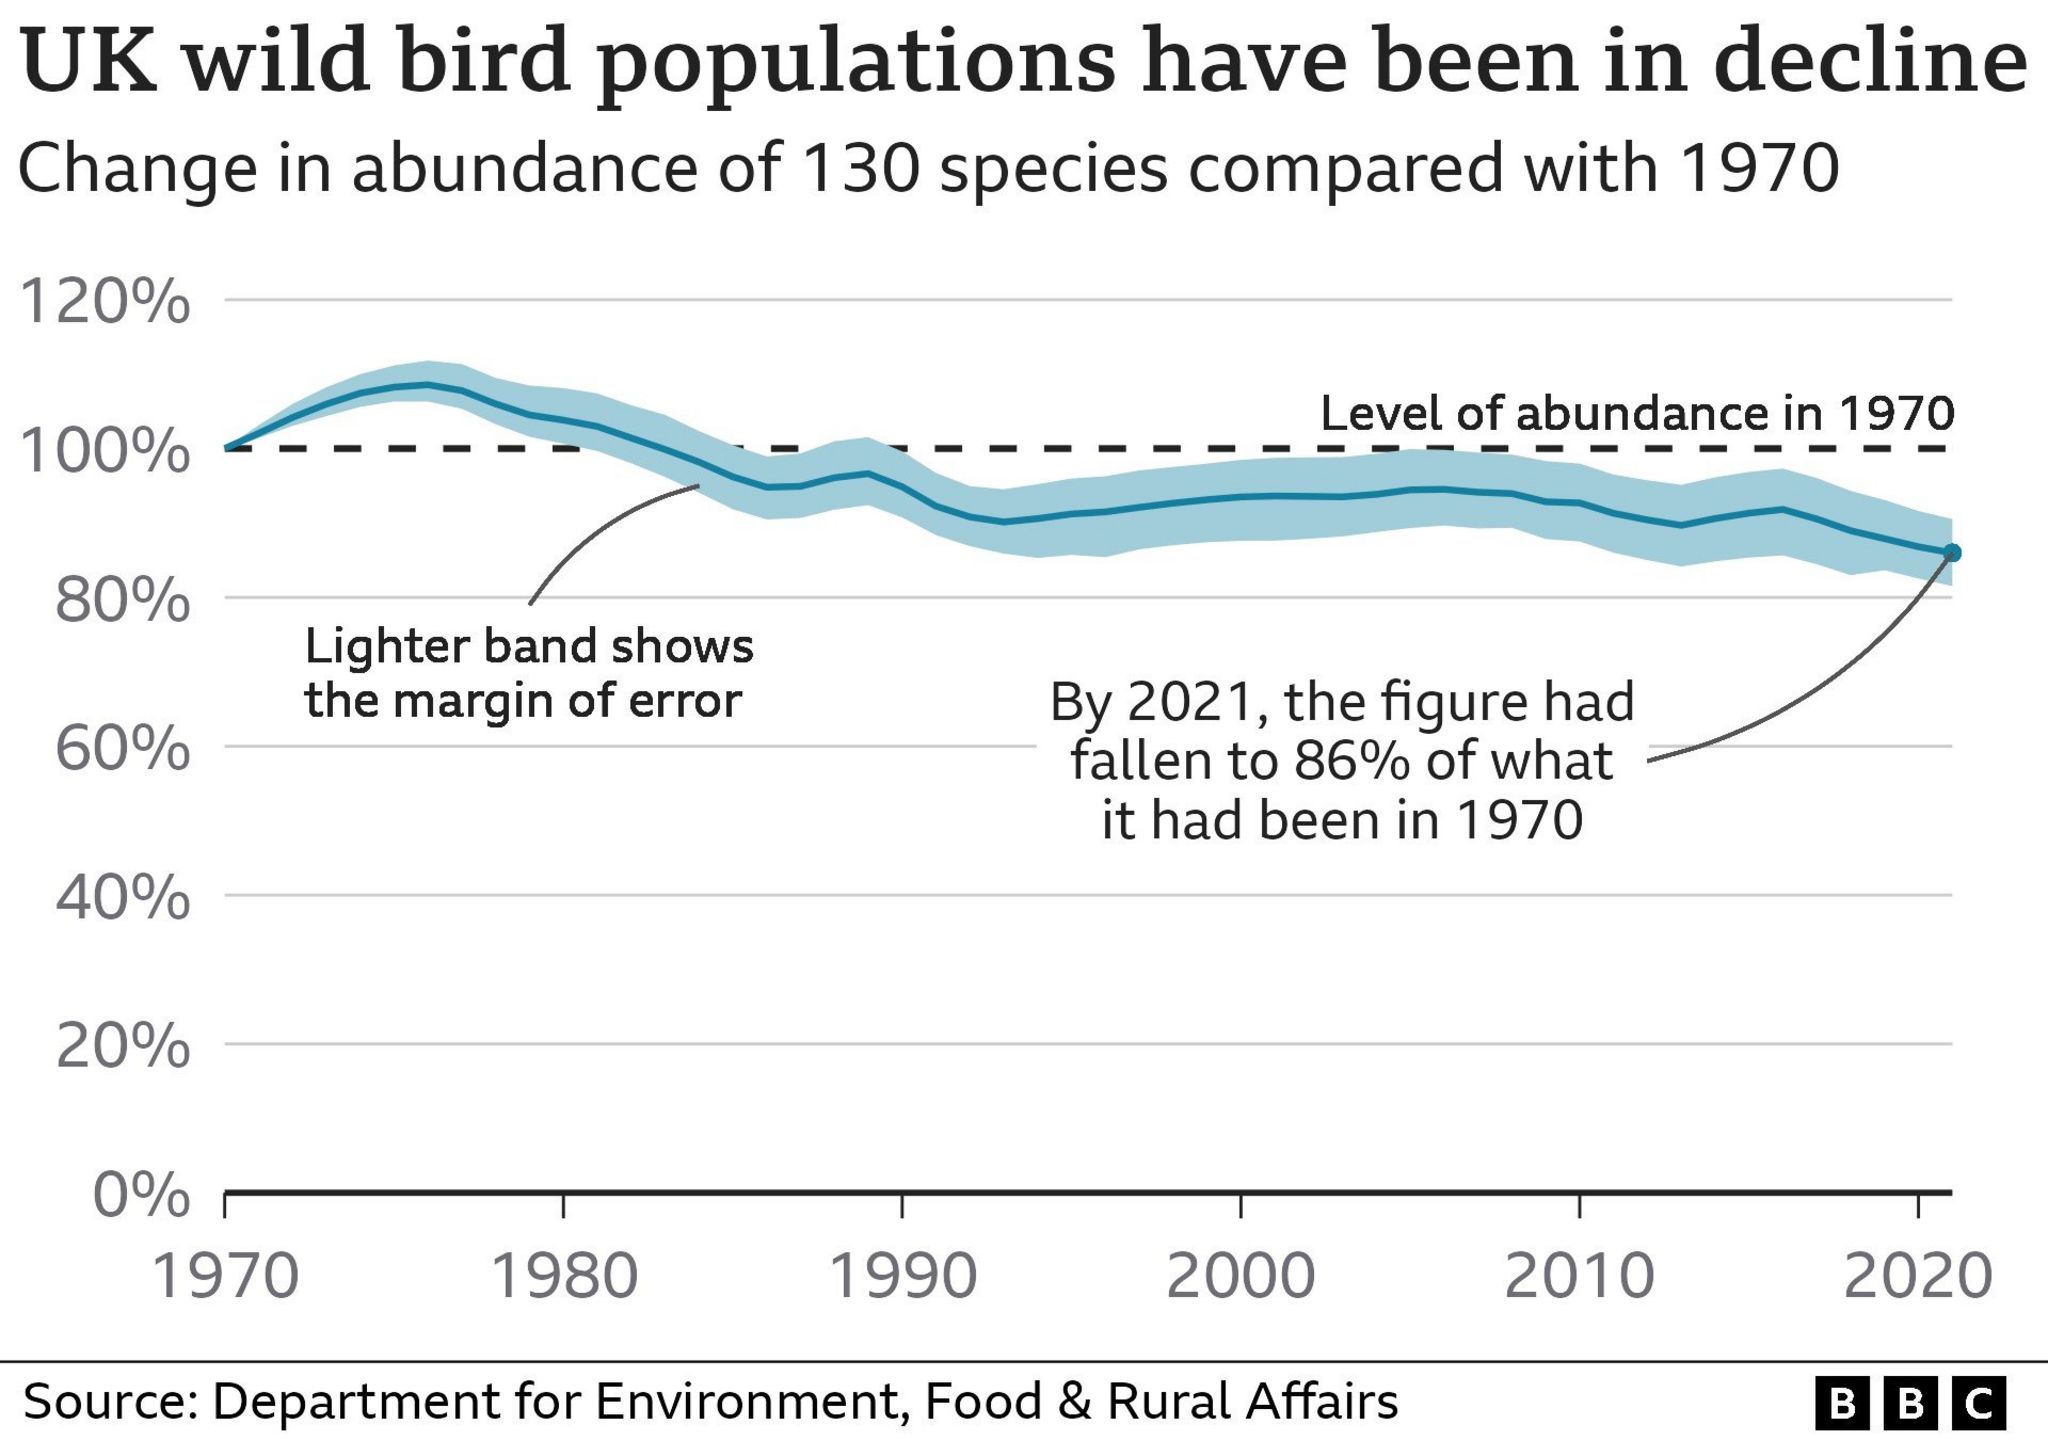 Chart showing UK wild bird populations have been falling and now stand at 86% of what they were in 1970